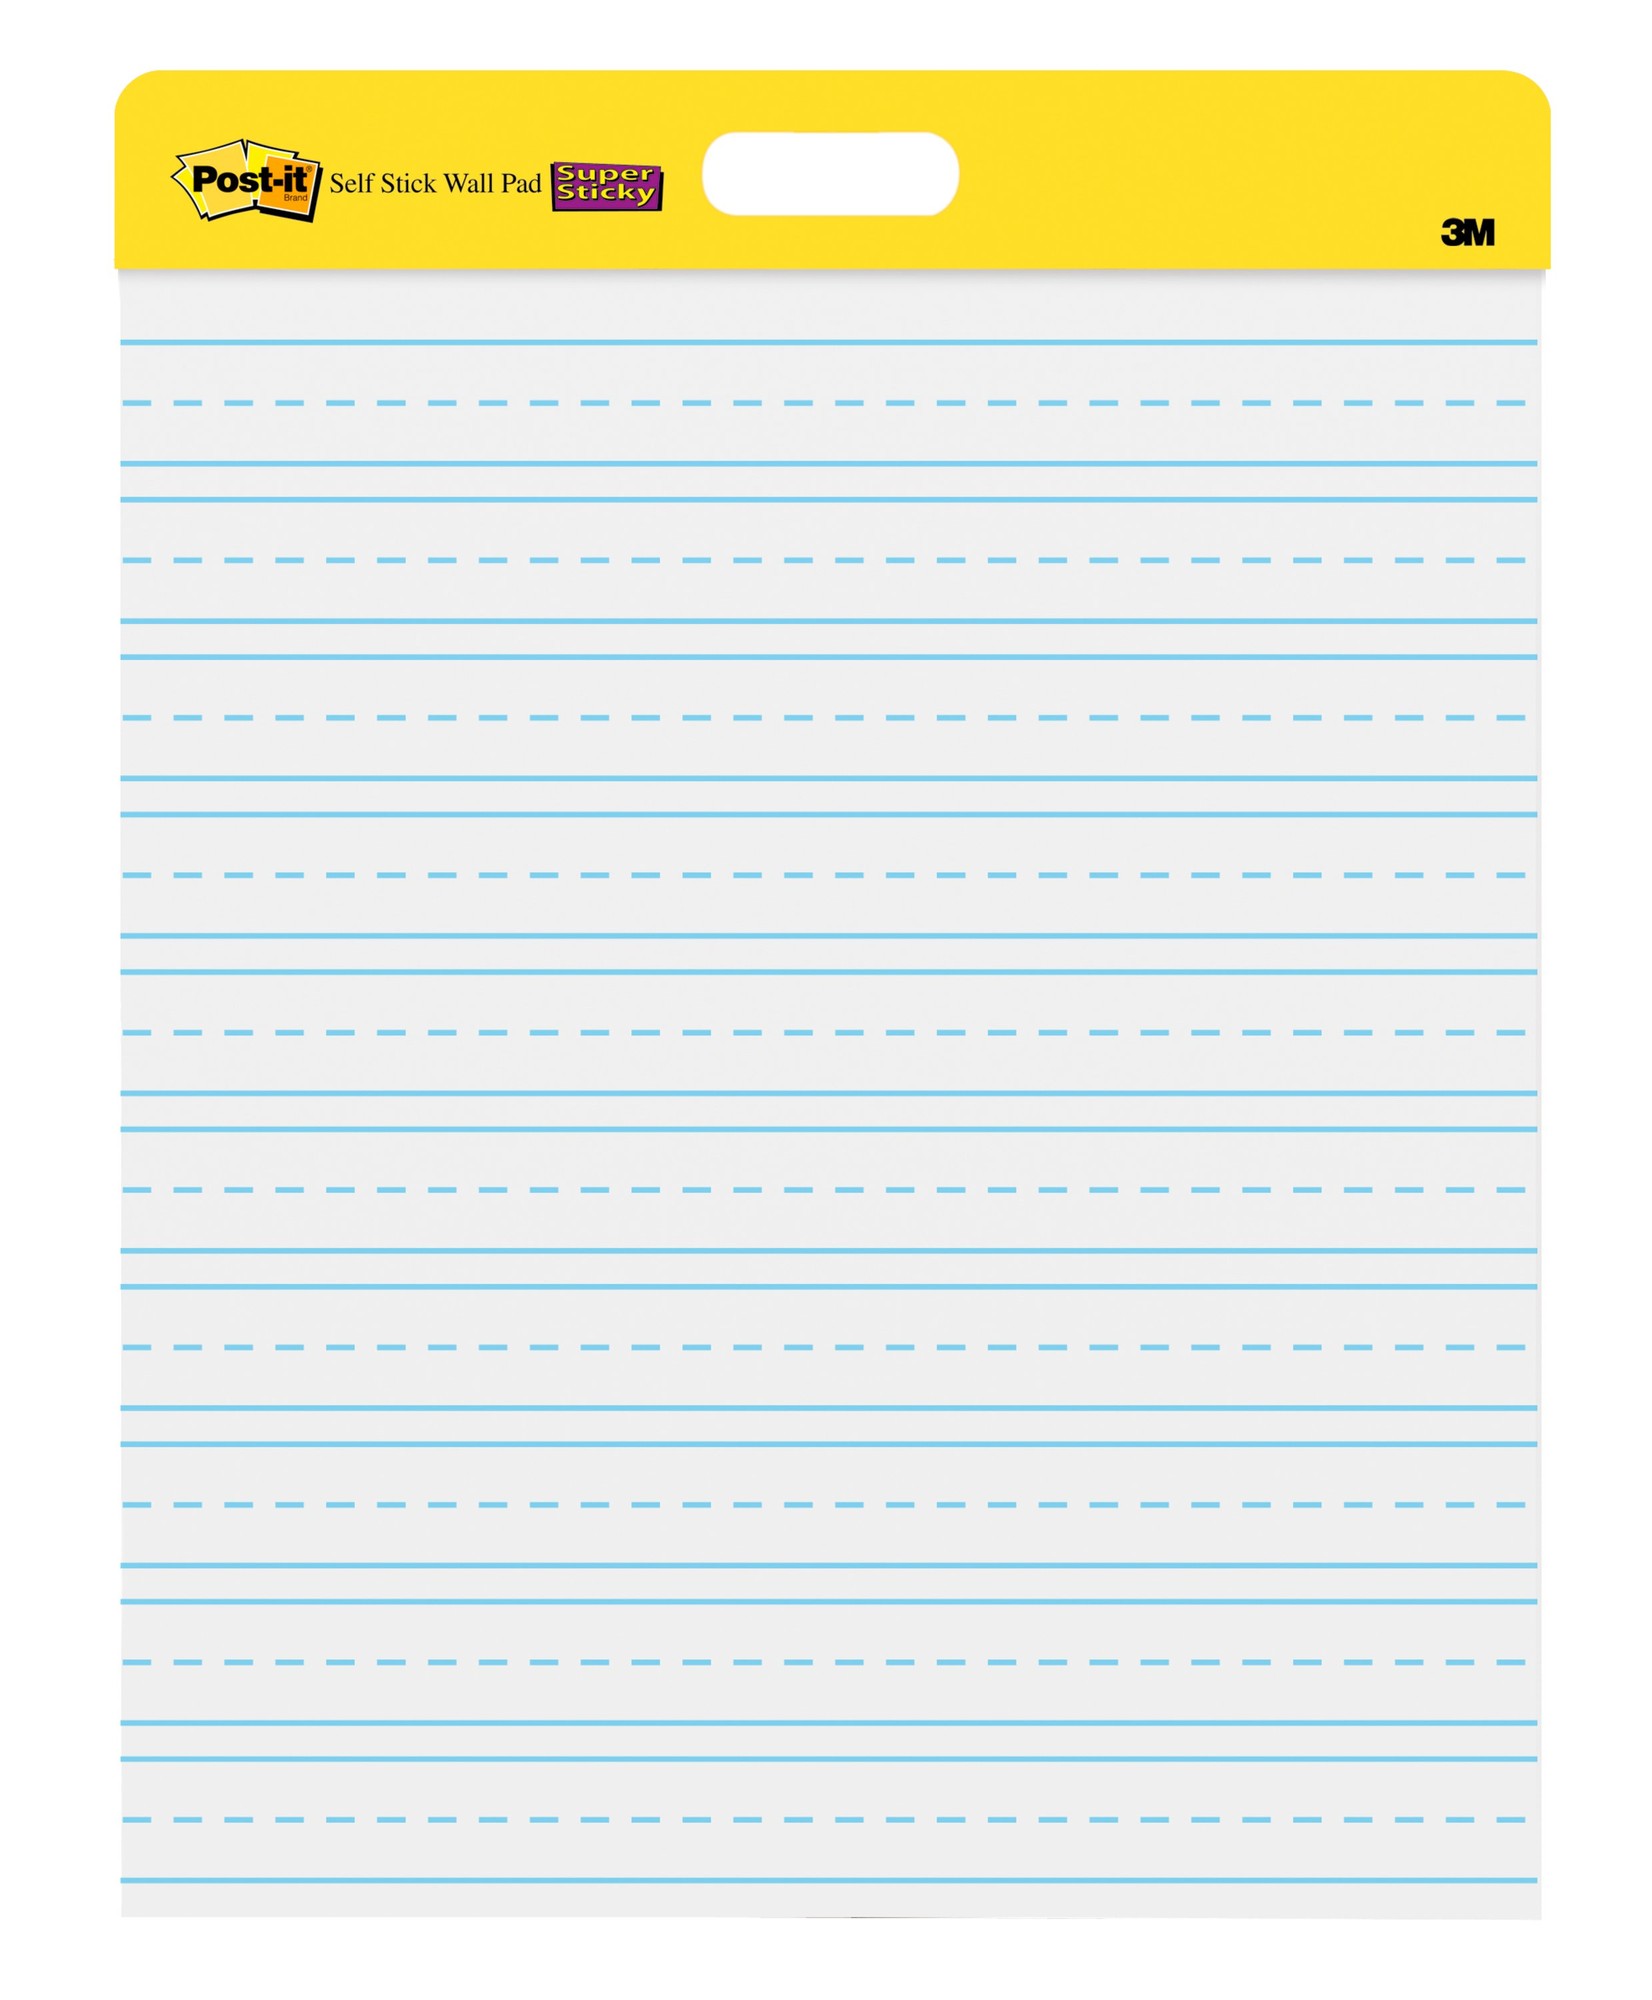 Post-it Self-Stick Wall Pads - 20 Sheets - Stapled - Ruled Blue Margin - 18.50 lb Basis Weight - 20" x 23" - White Paper - 